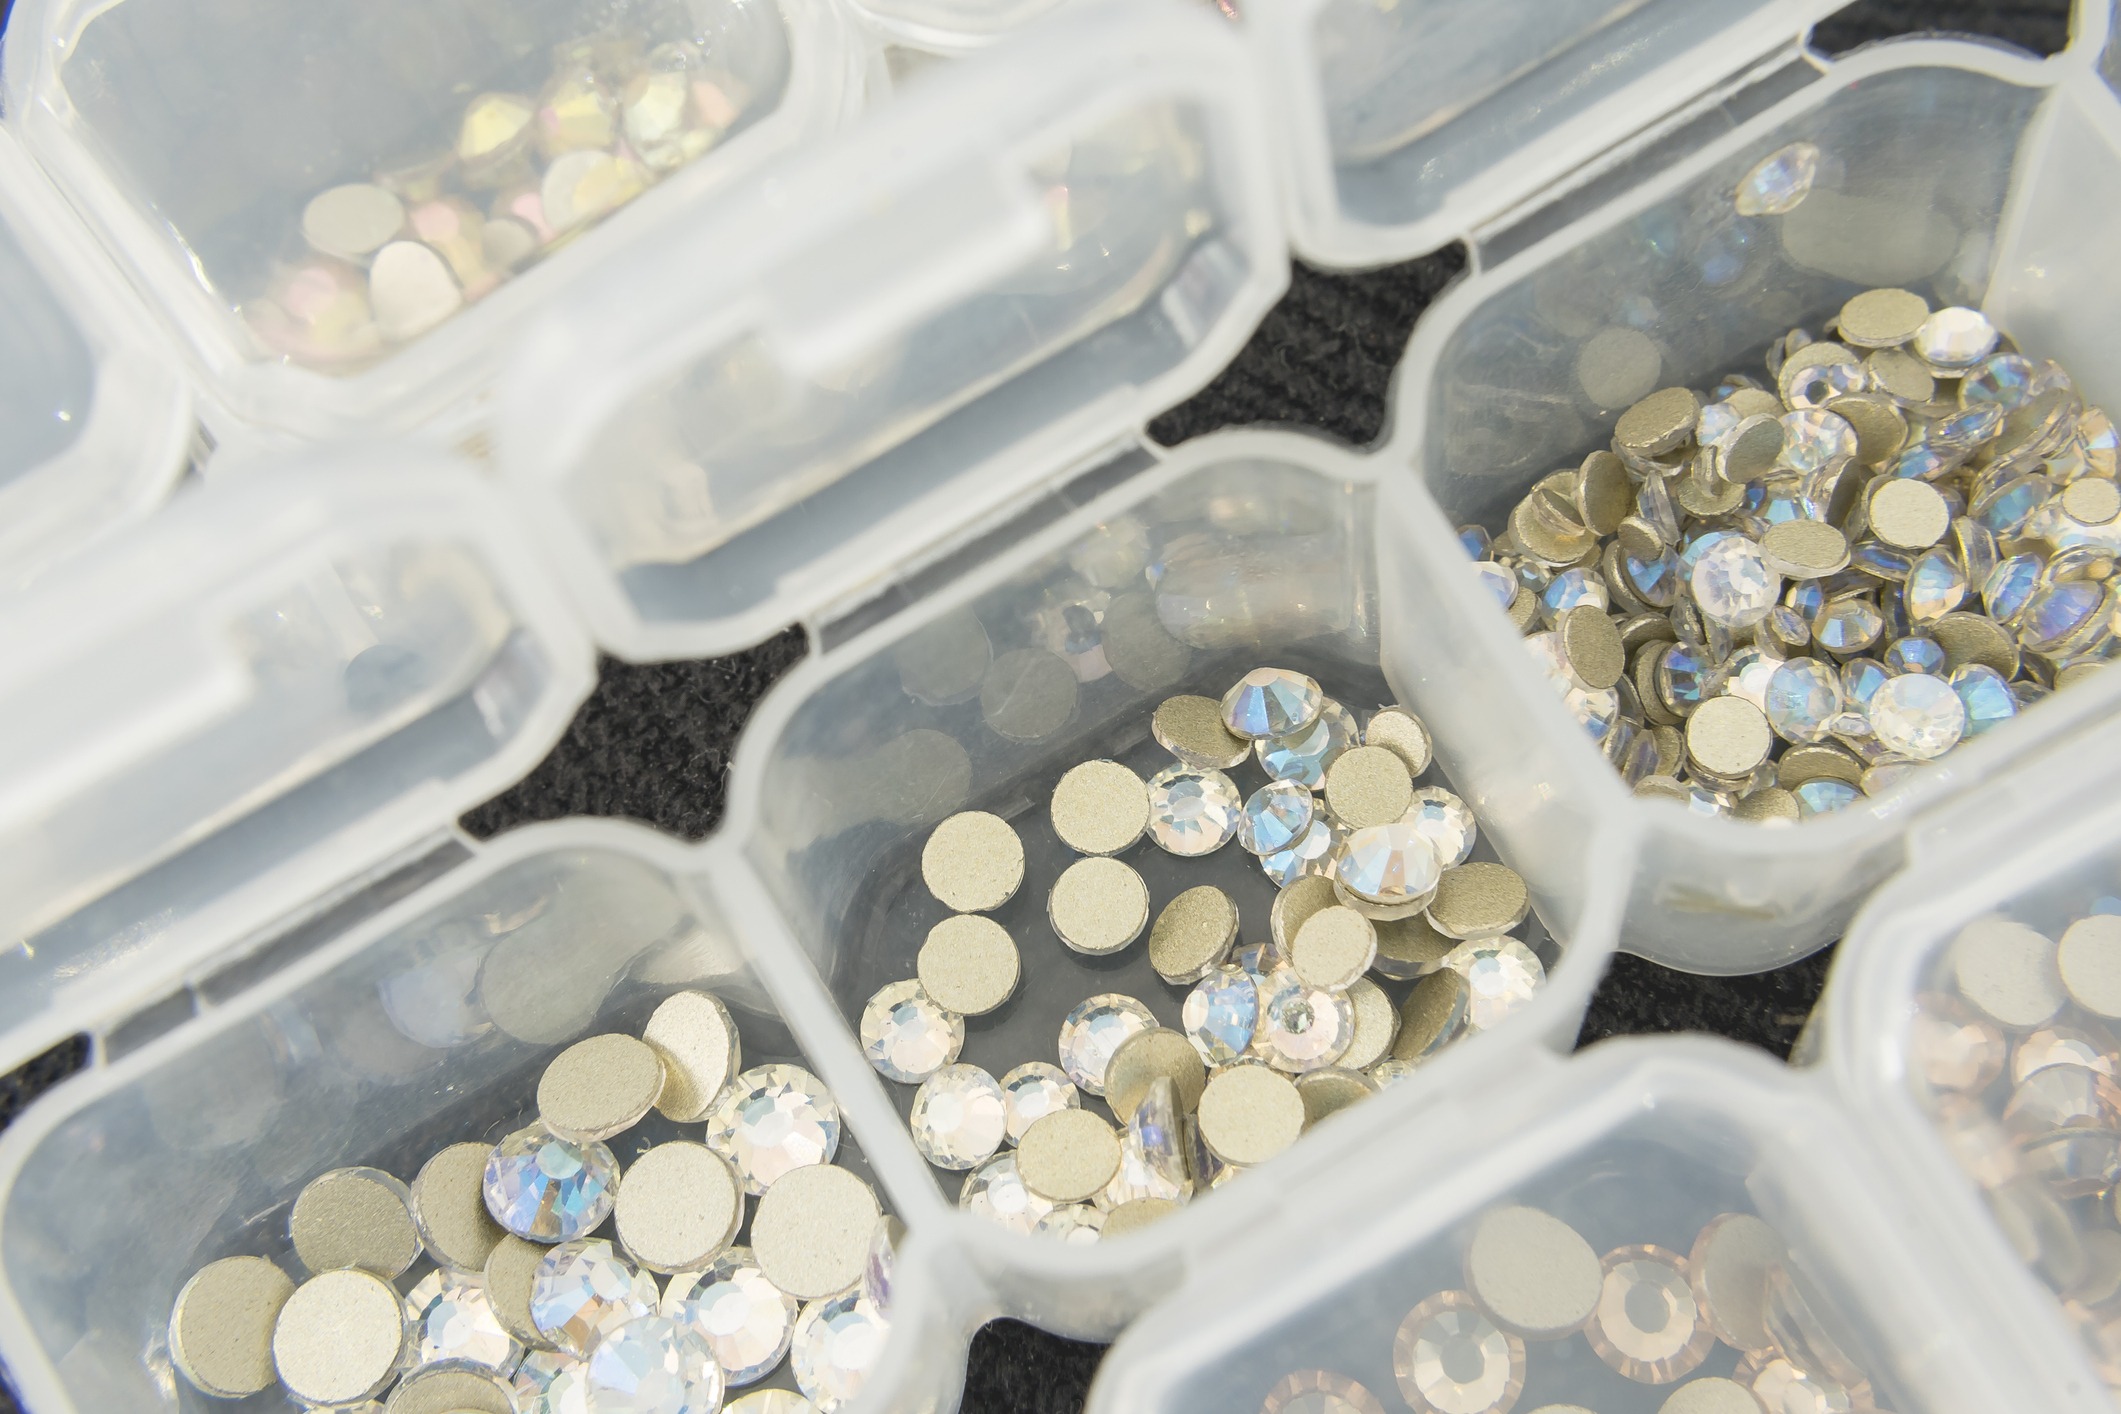 Various nail art rhinestones and accessories neatly organized in clear containers.